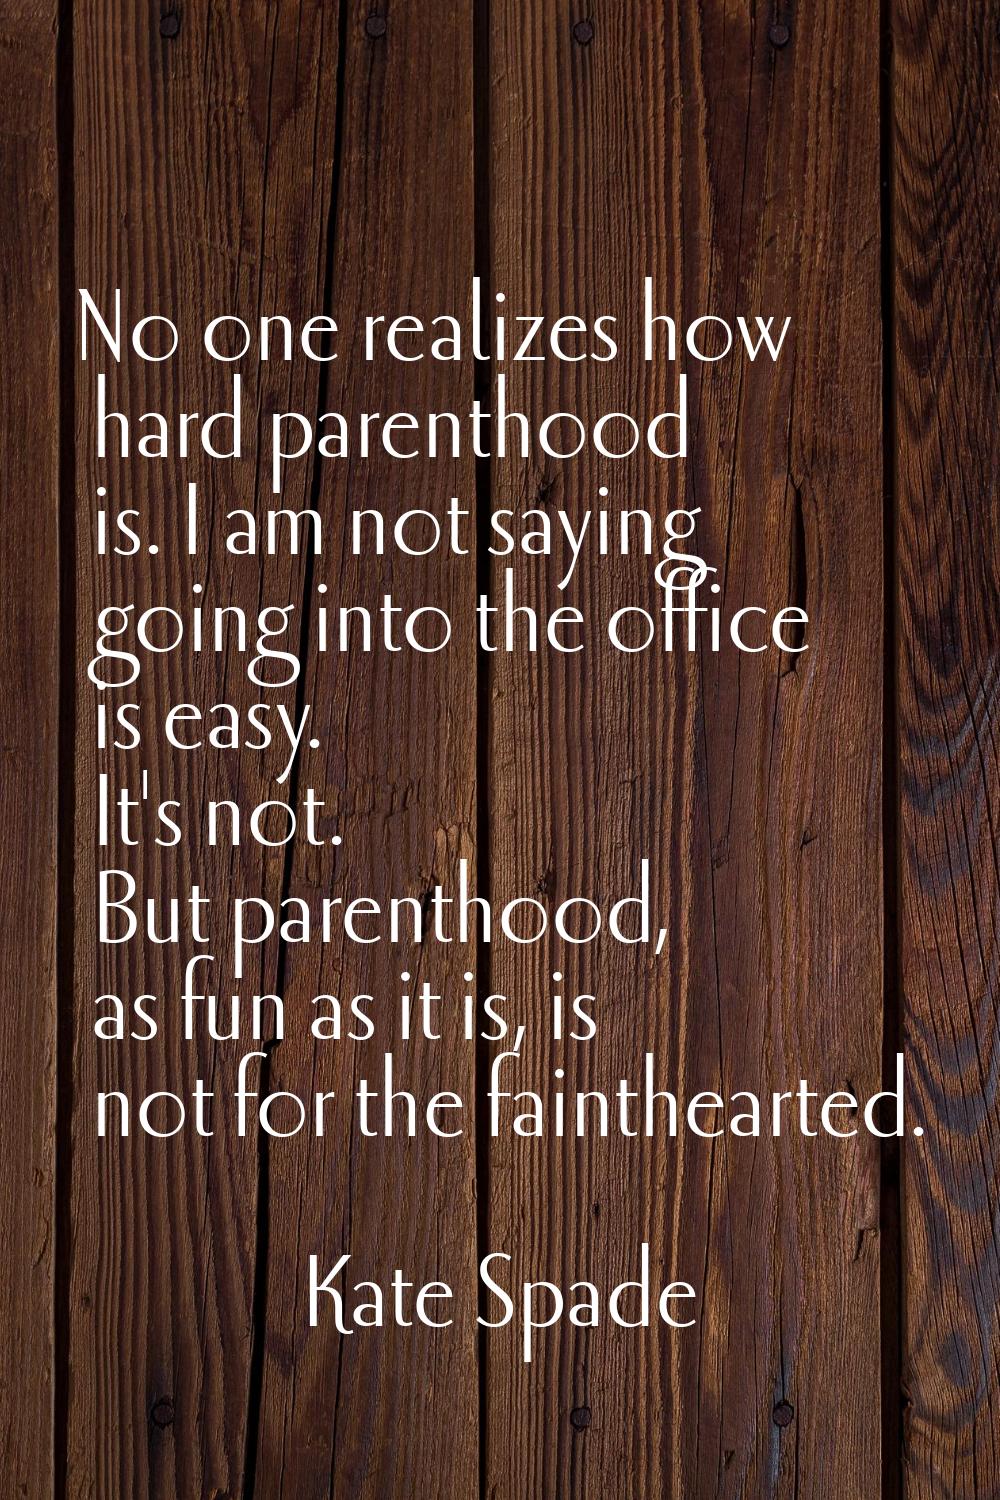 No one realizes how hard parenthood is. I am not saying going into the office is easy. It's not. Bu